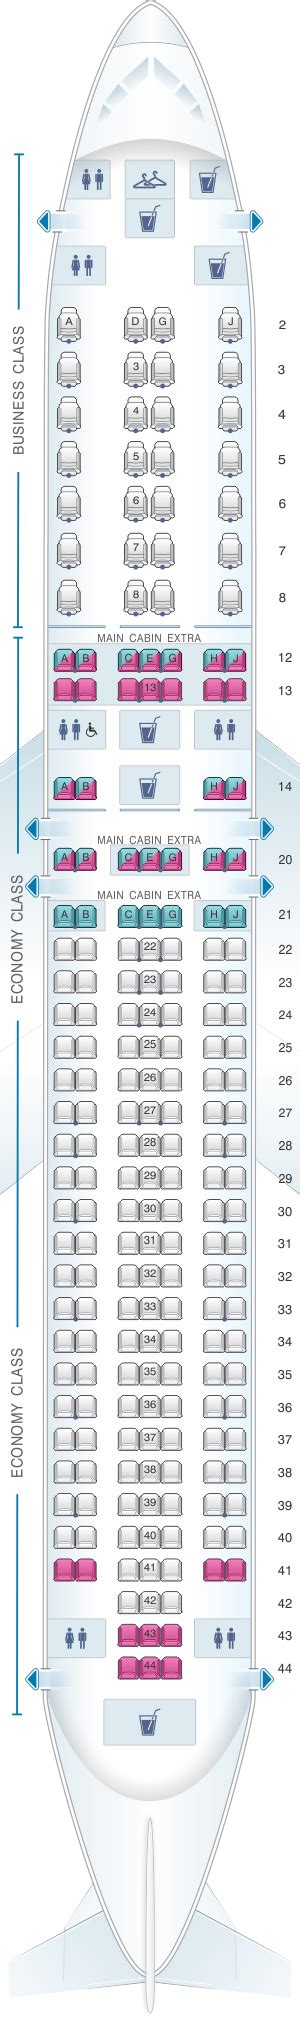 Seat Map American Airlines Boeing B Airplane Seats Boeing